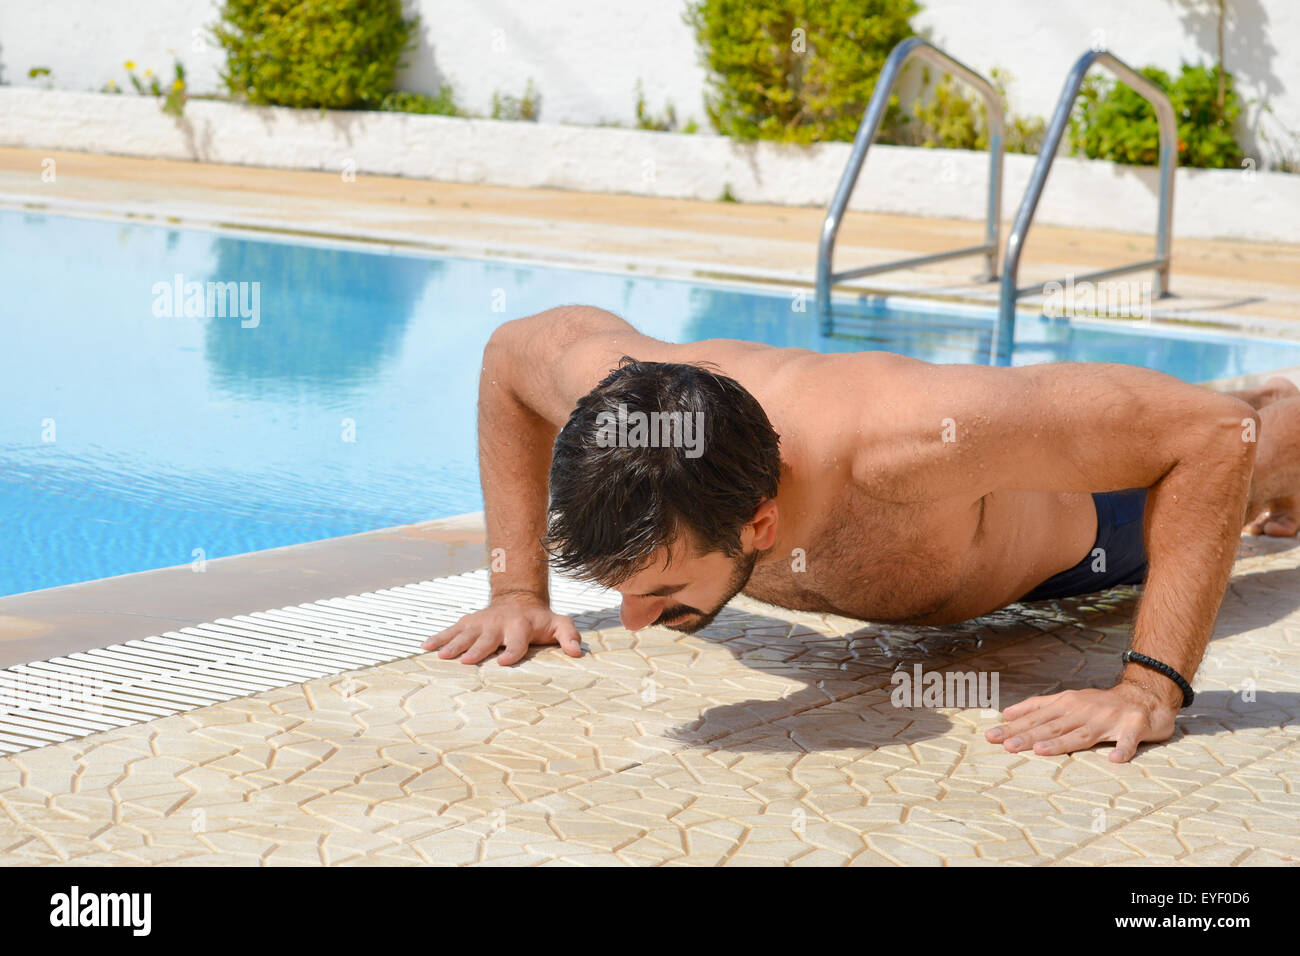 Bearded tanned man exercising by the pool Stock Photo